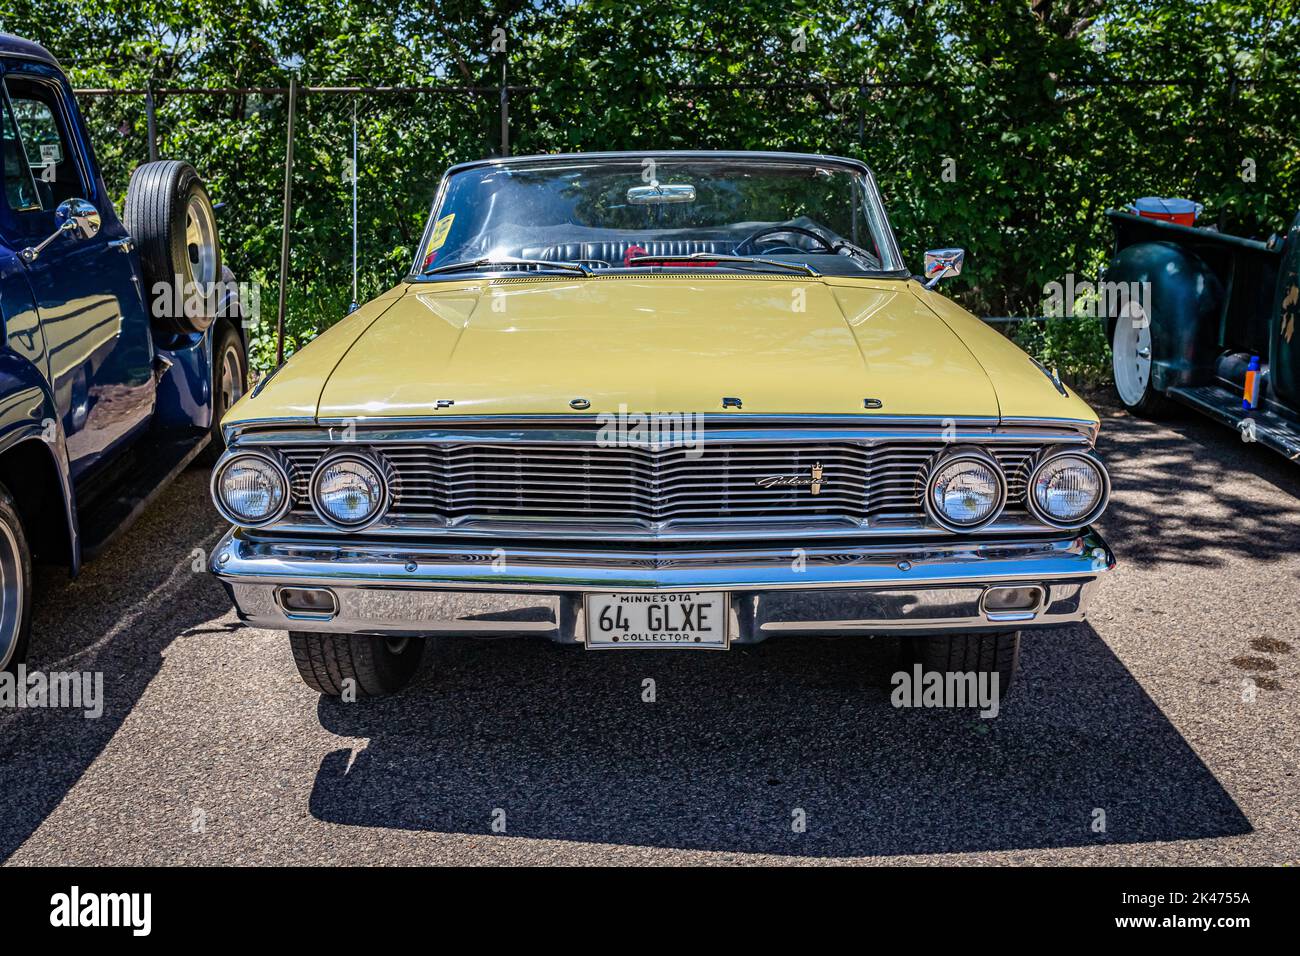 Falcon Heights, MN - June 18, 2022: High perspective front view of a 1964 Ford Galaxie 500 Convertible at a local car show. Stock Photo